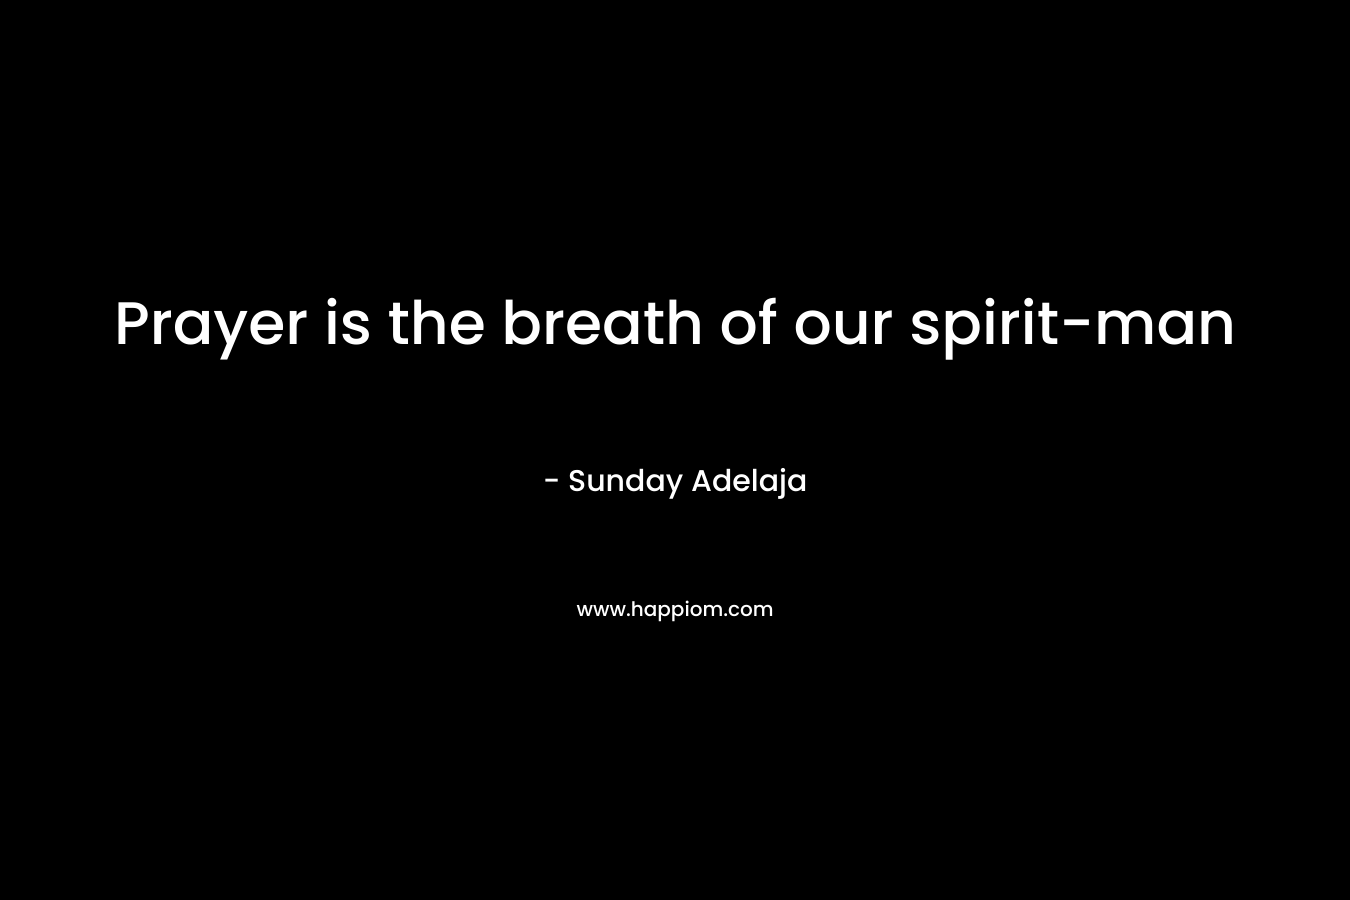 Prayer is the breath of our spirit-man